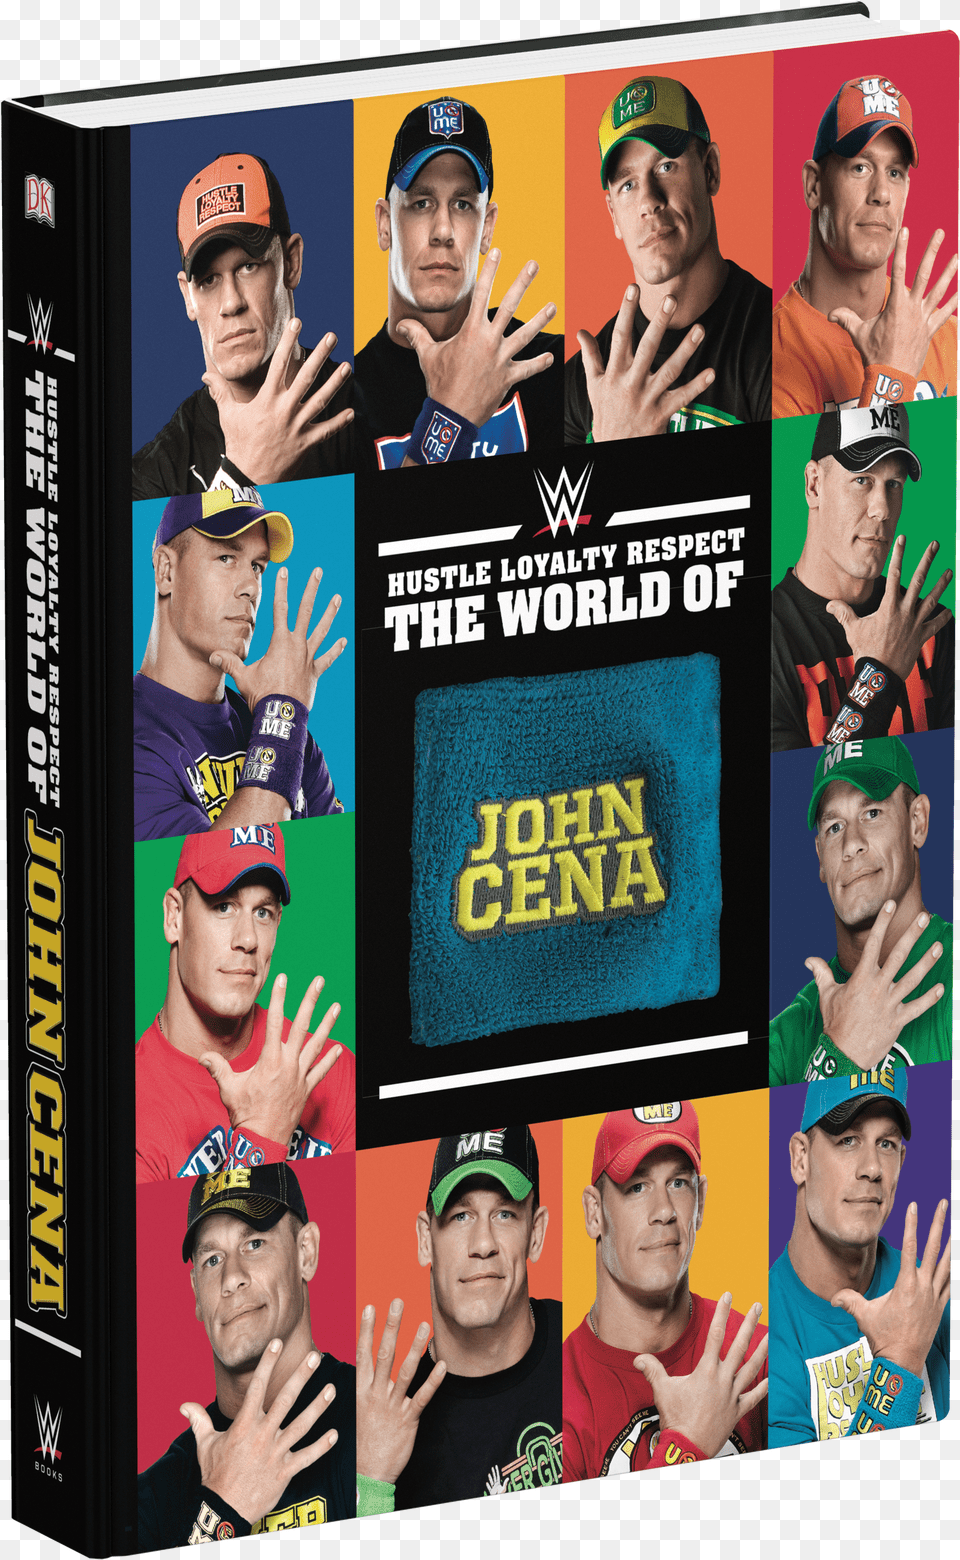 Hustle Loyalty And Respect Hustle Loyalty And Respect The World Of John Cena Png Image